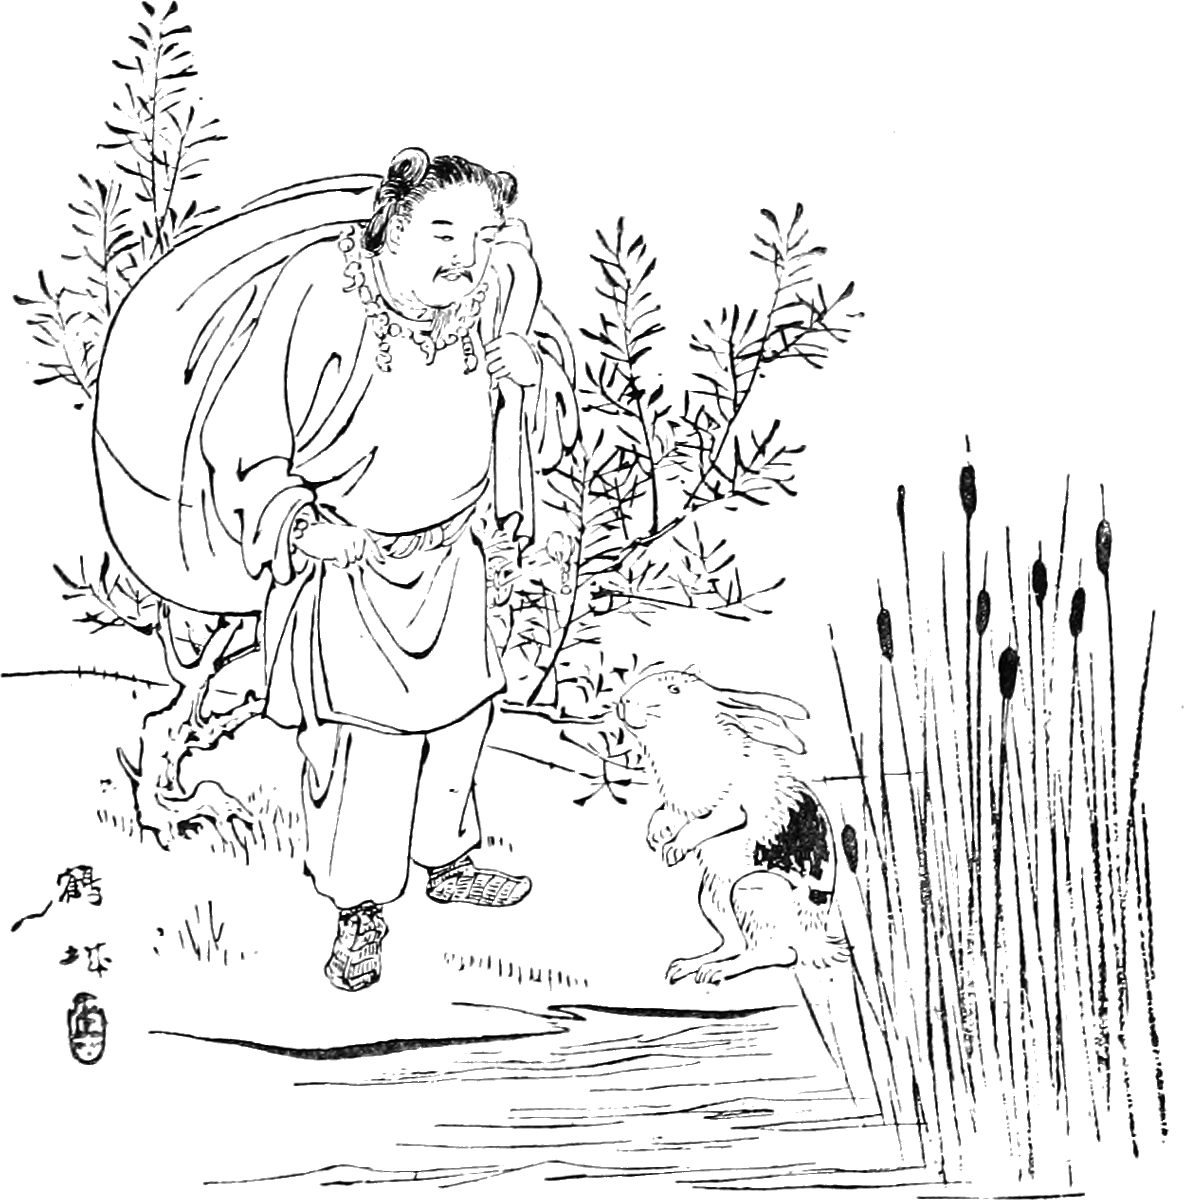 You can read the full story from The Japanese Fairy Book here:  https://en.m.wikisource.org/wiki/The_Japanese_Fairy_Book/The_White_Hare_And_The_CrocodilesThese illustrations are also from The Japanese Fairy Book.See the next tweet for art credits for the rest of this thread.4/5